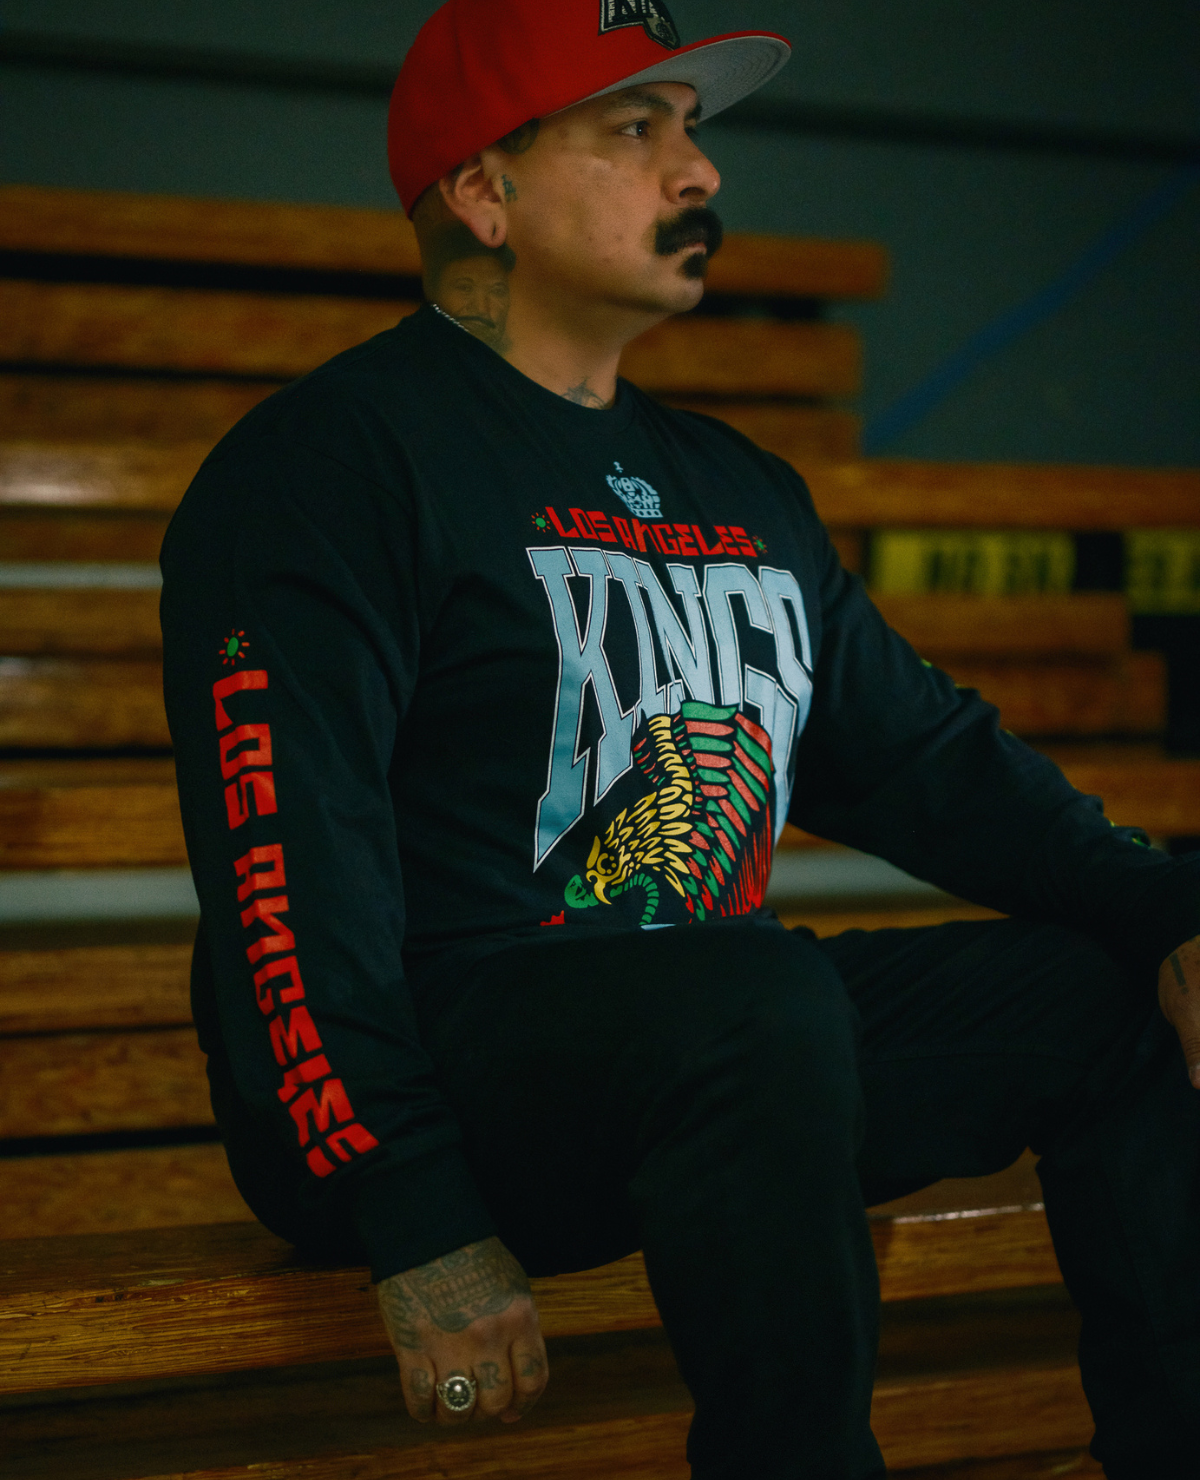 Lifetipsforbetterliving Hockey Clothing company - The Los Angeles Kings celebrate their local Mexican Community tonight in some fantastic ways. 